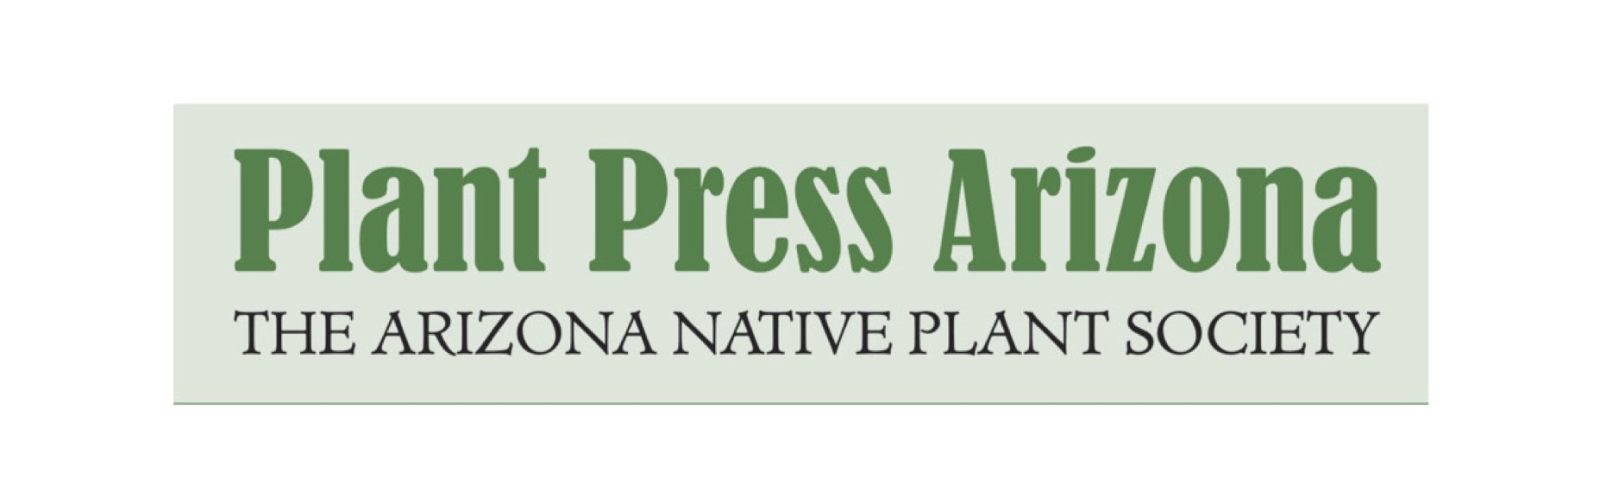 Native Plants of the American Southwest Letterpress Print – Mouse in the  House Shop